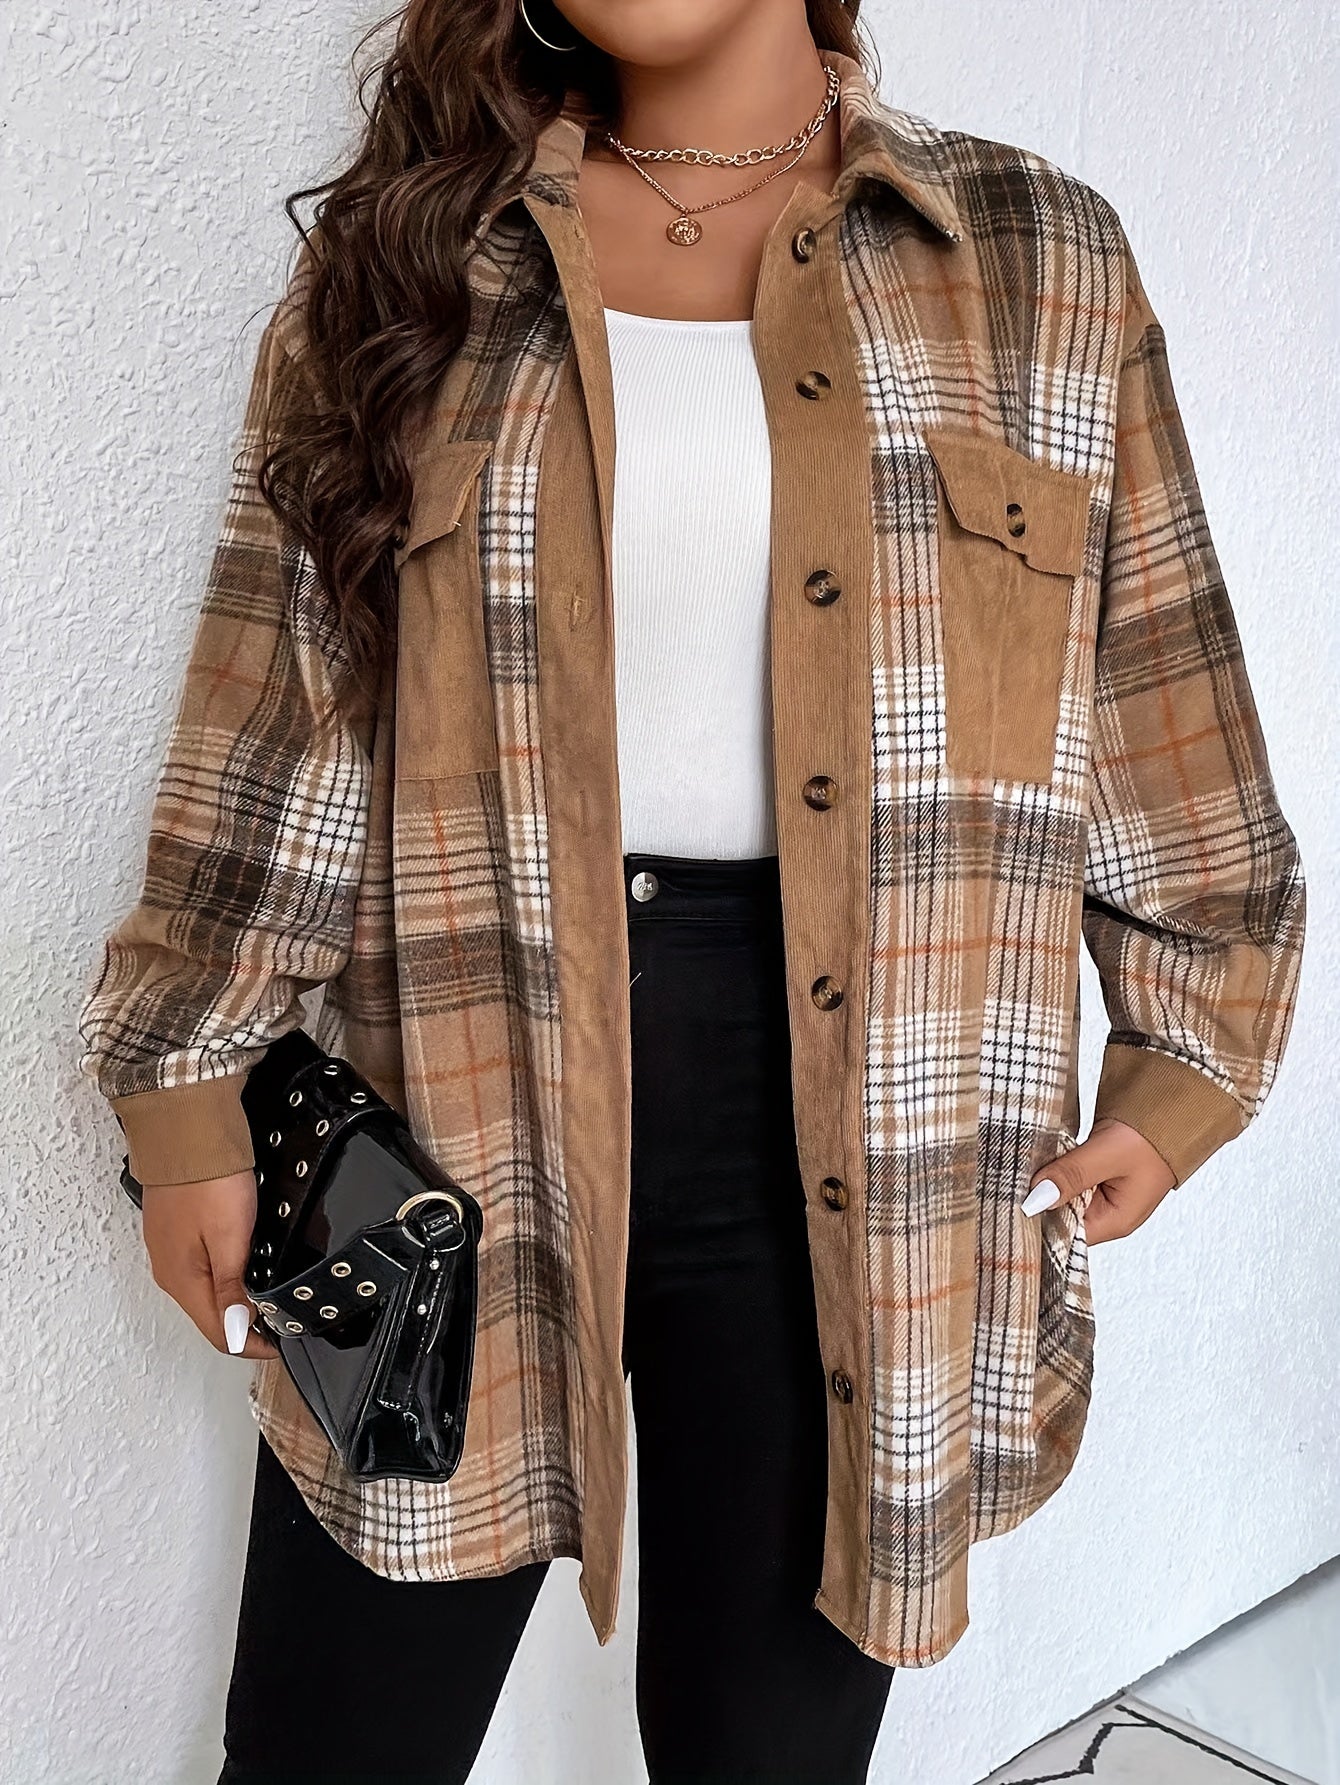 Plus Size Casual Blouse, Women's Plus Plaid Print Button Up Lantern Sleeve Turn Down Collar Tunic Shirt With Flap Pocket